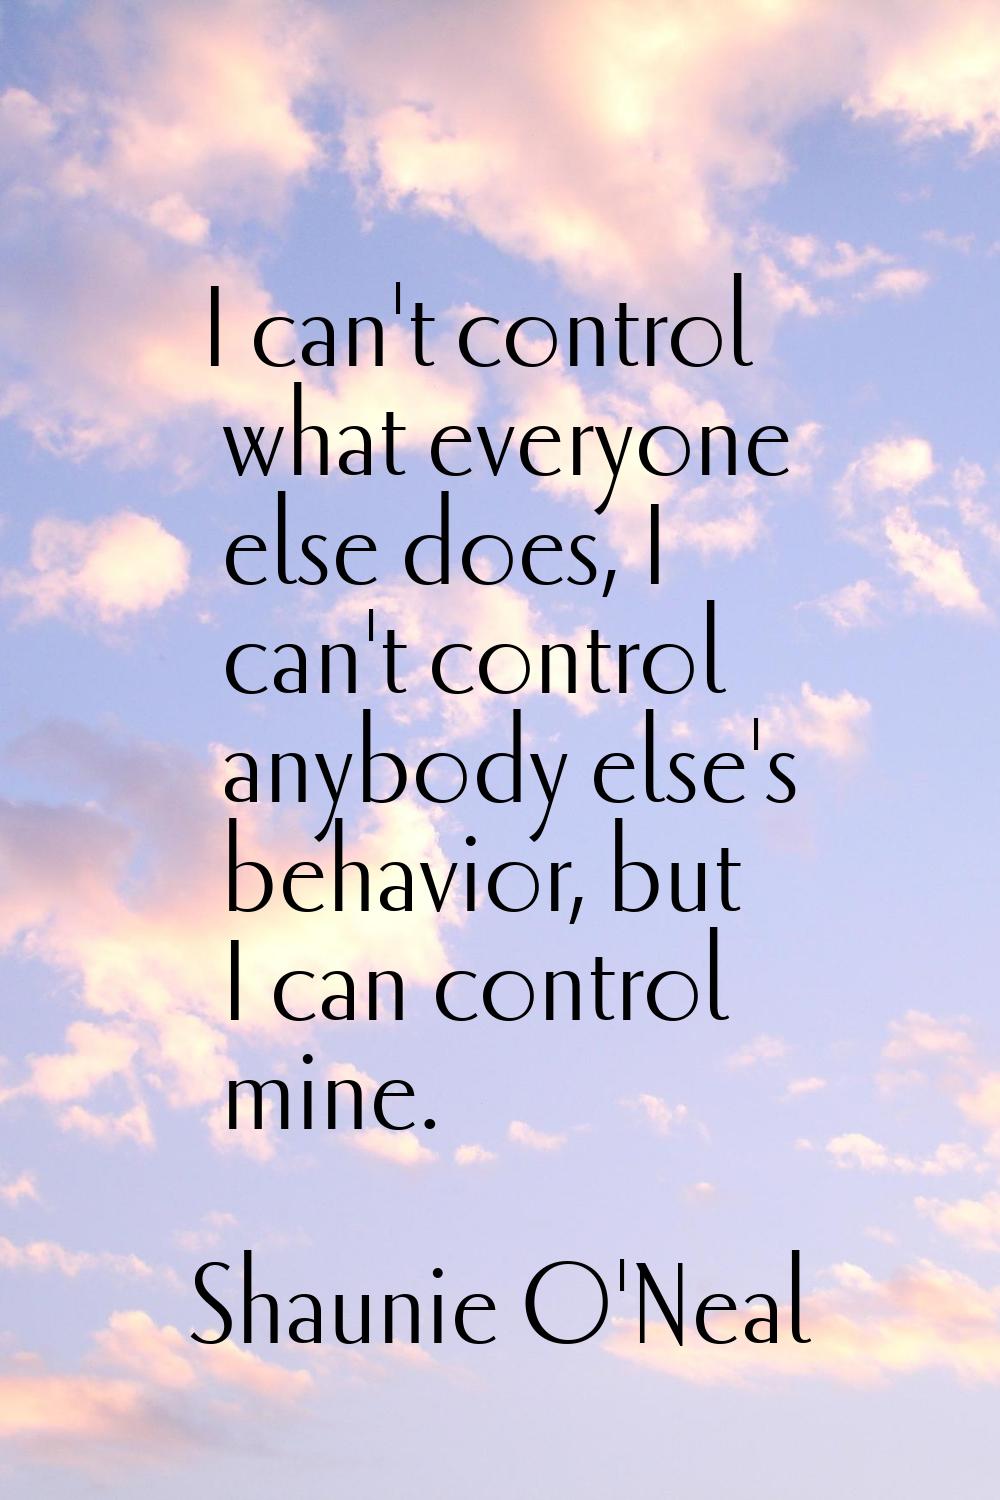 I can't control what everyone else does, I can't control anybody else's behavior, but I can control